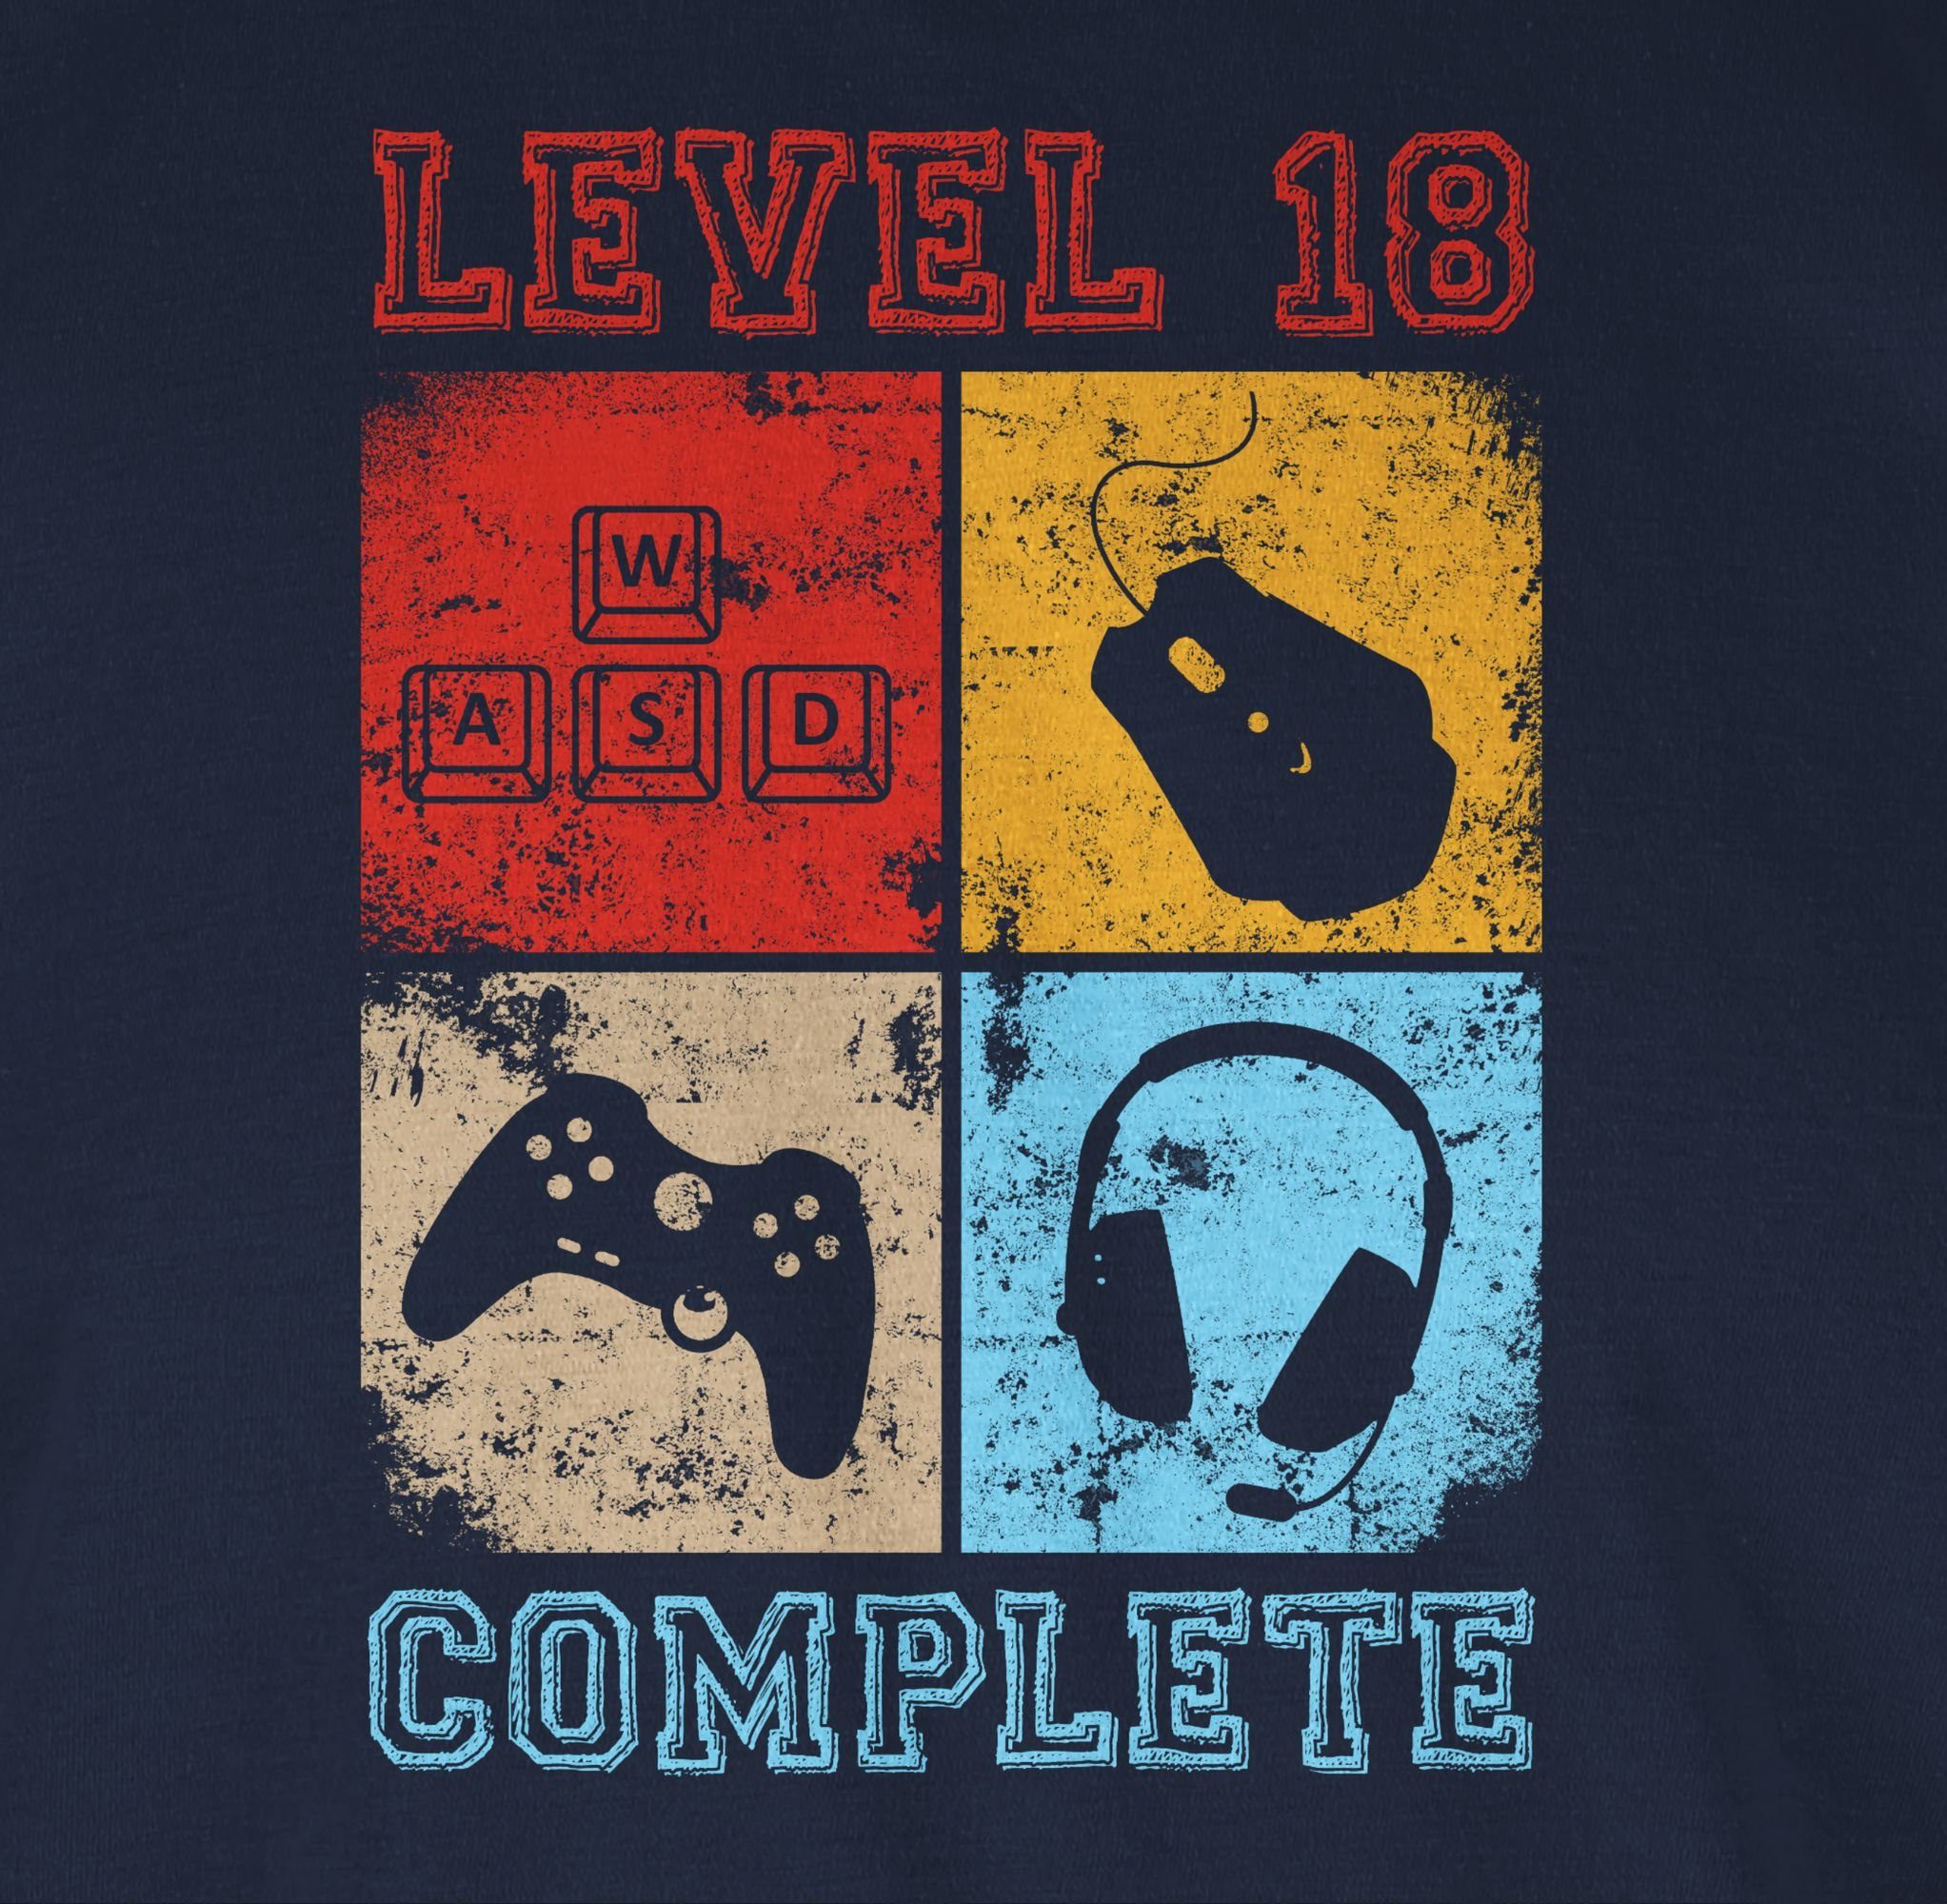 Level 02 Geburtstag T-Shirt Completed Shirtracer Blau Complete Navy 18. 18